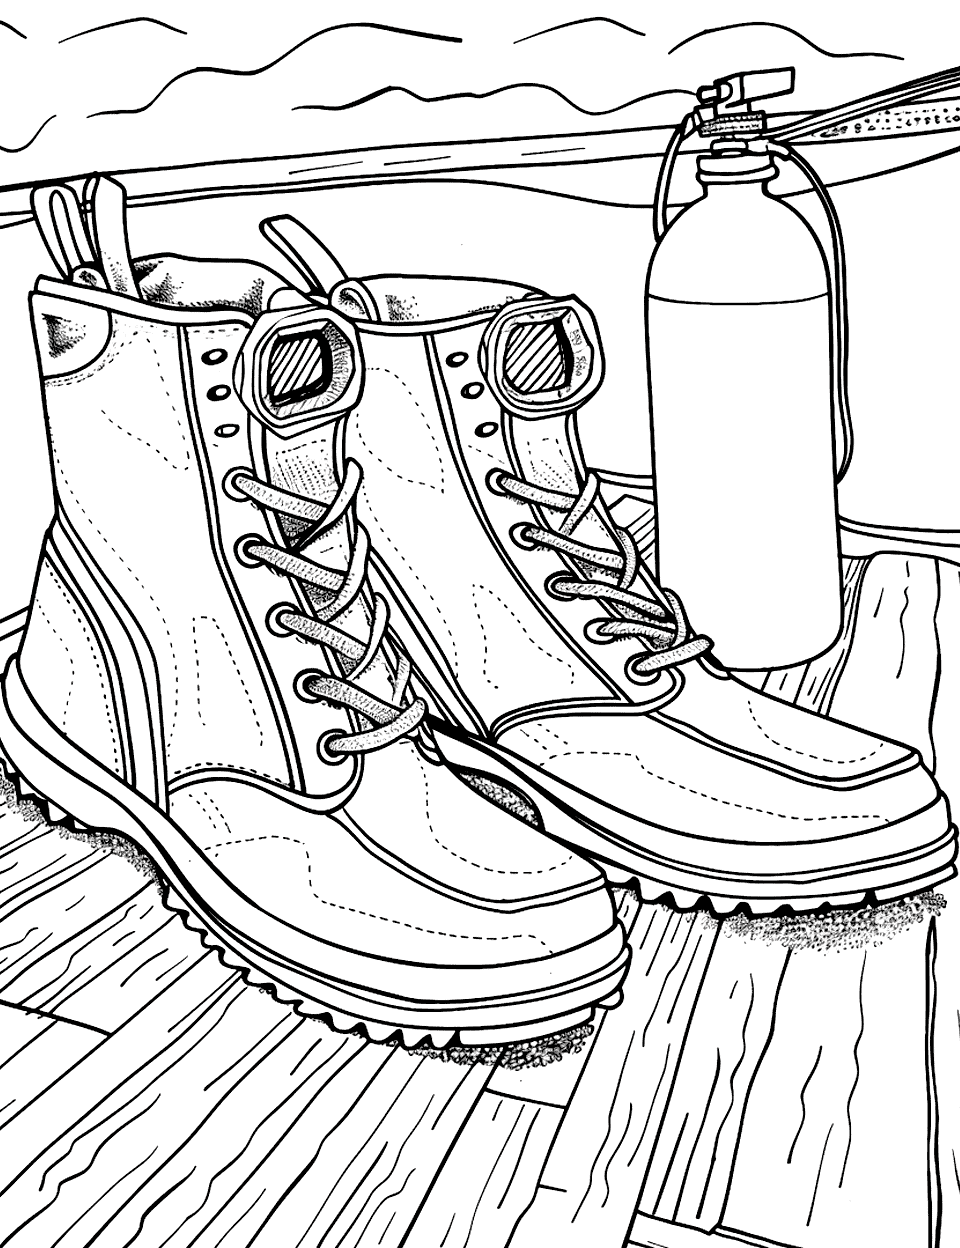 Scuba Diving Boots on a Boat Shoe Coloring Page - Neoprene boots with an oxygen tank on a boat deck.